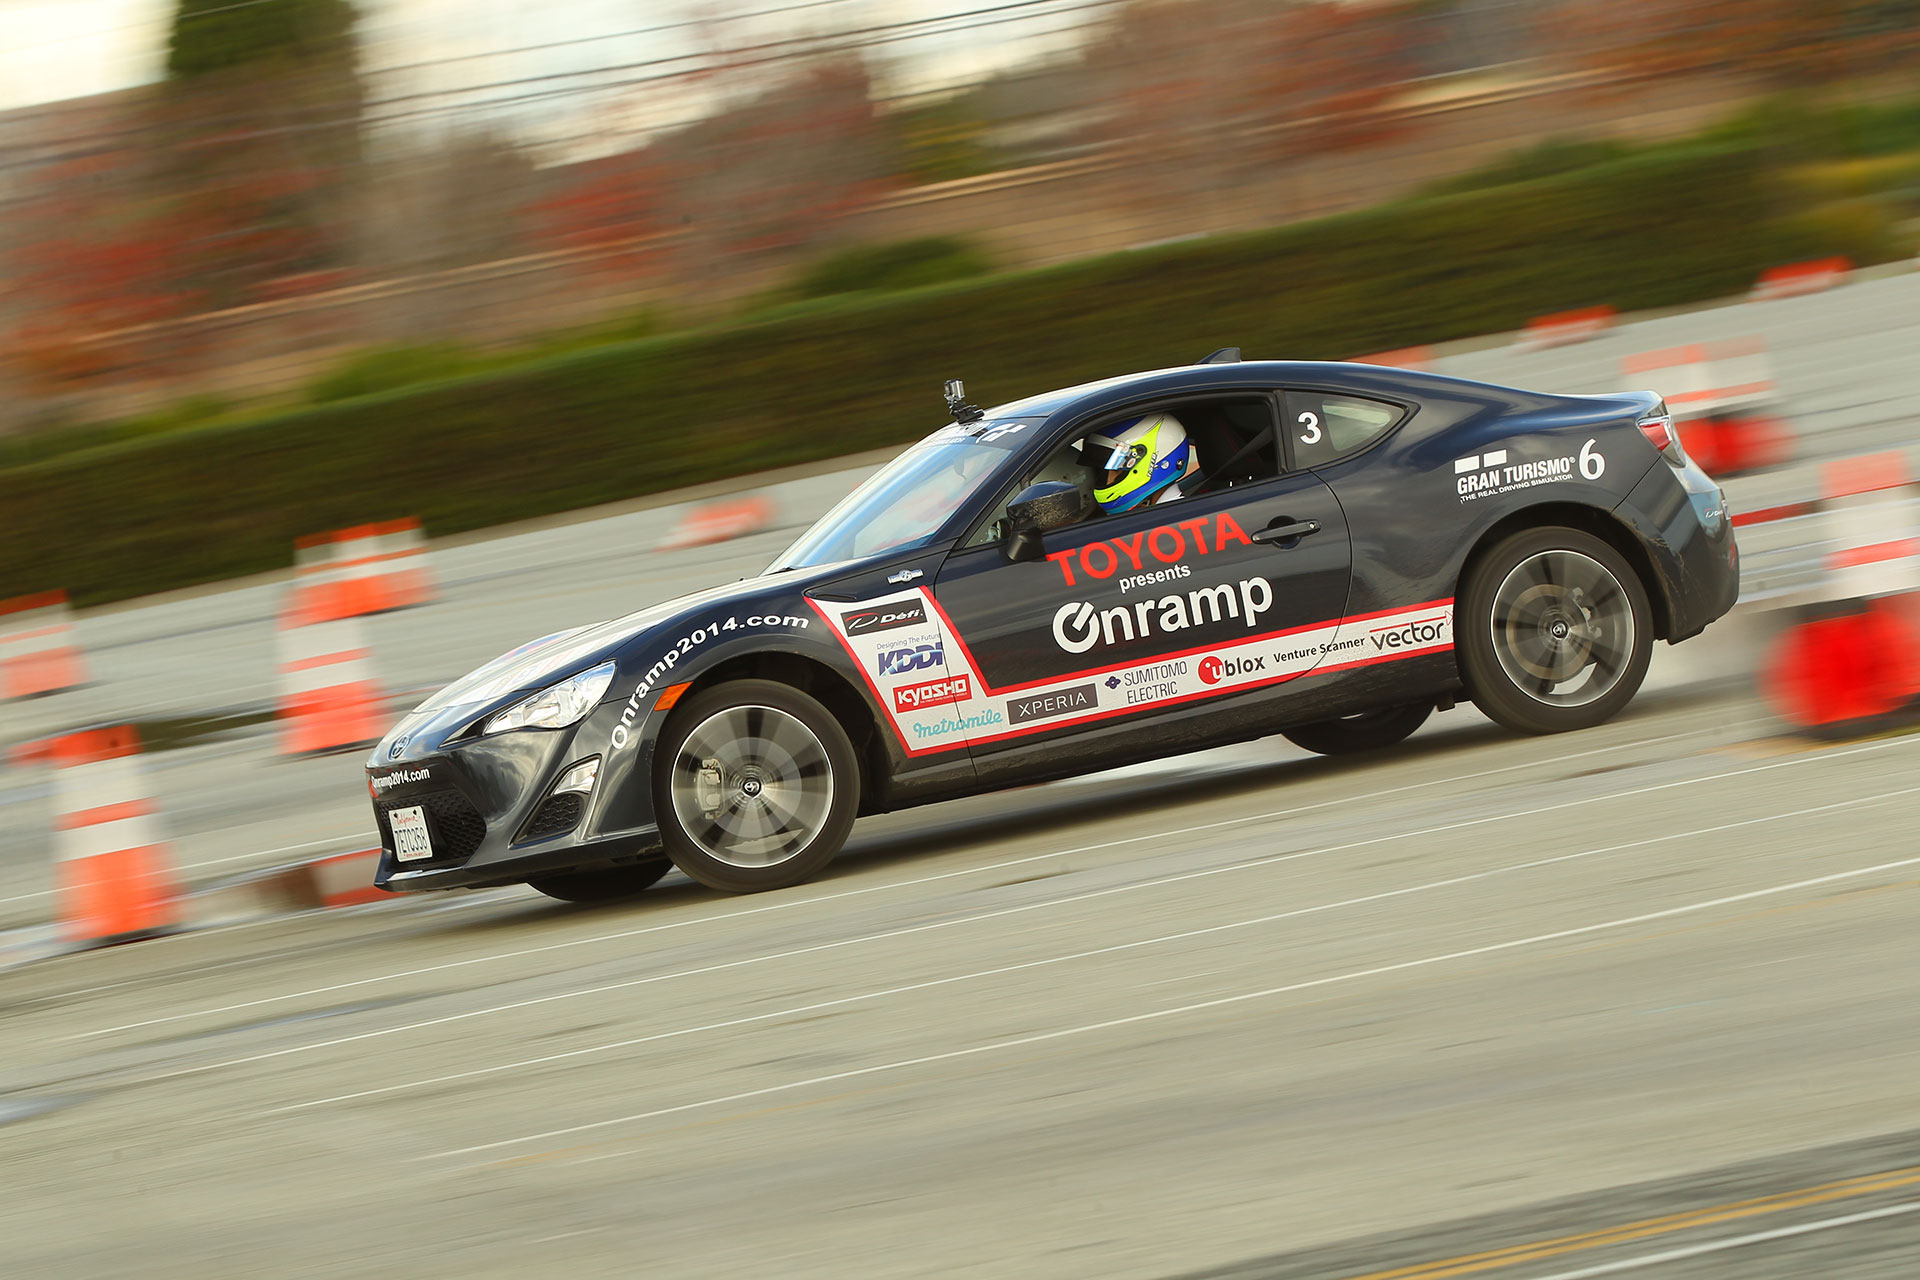 Scion FR-S (Toyota 86) used in the Onramp 2014 Challenge 2